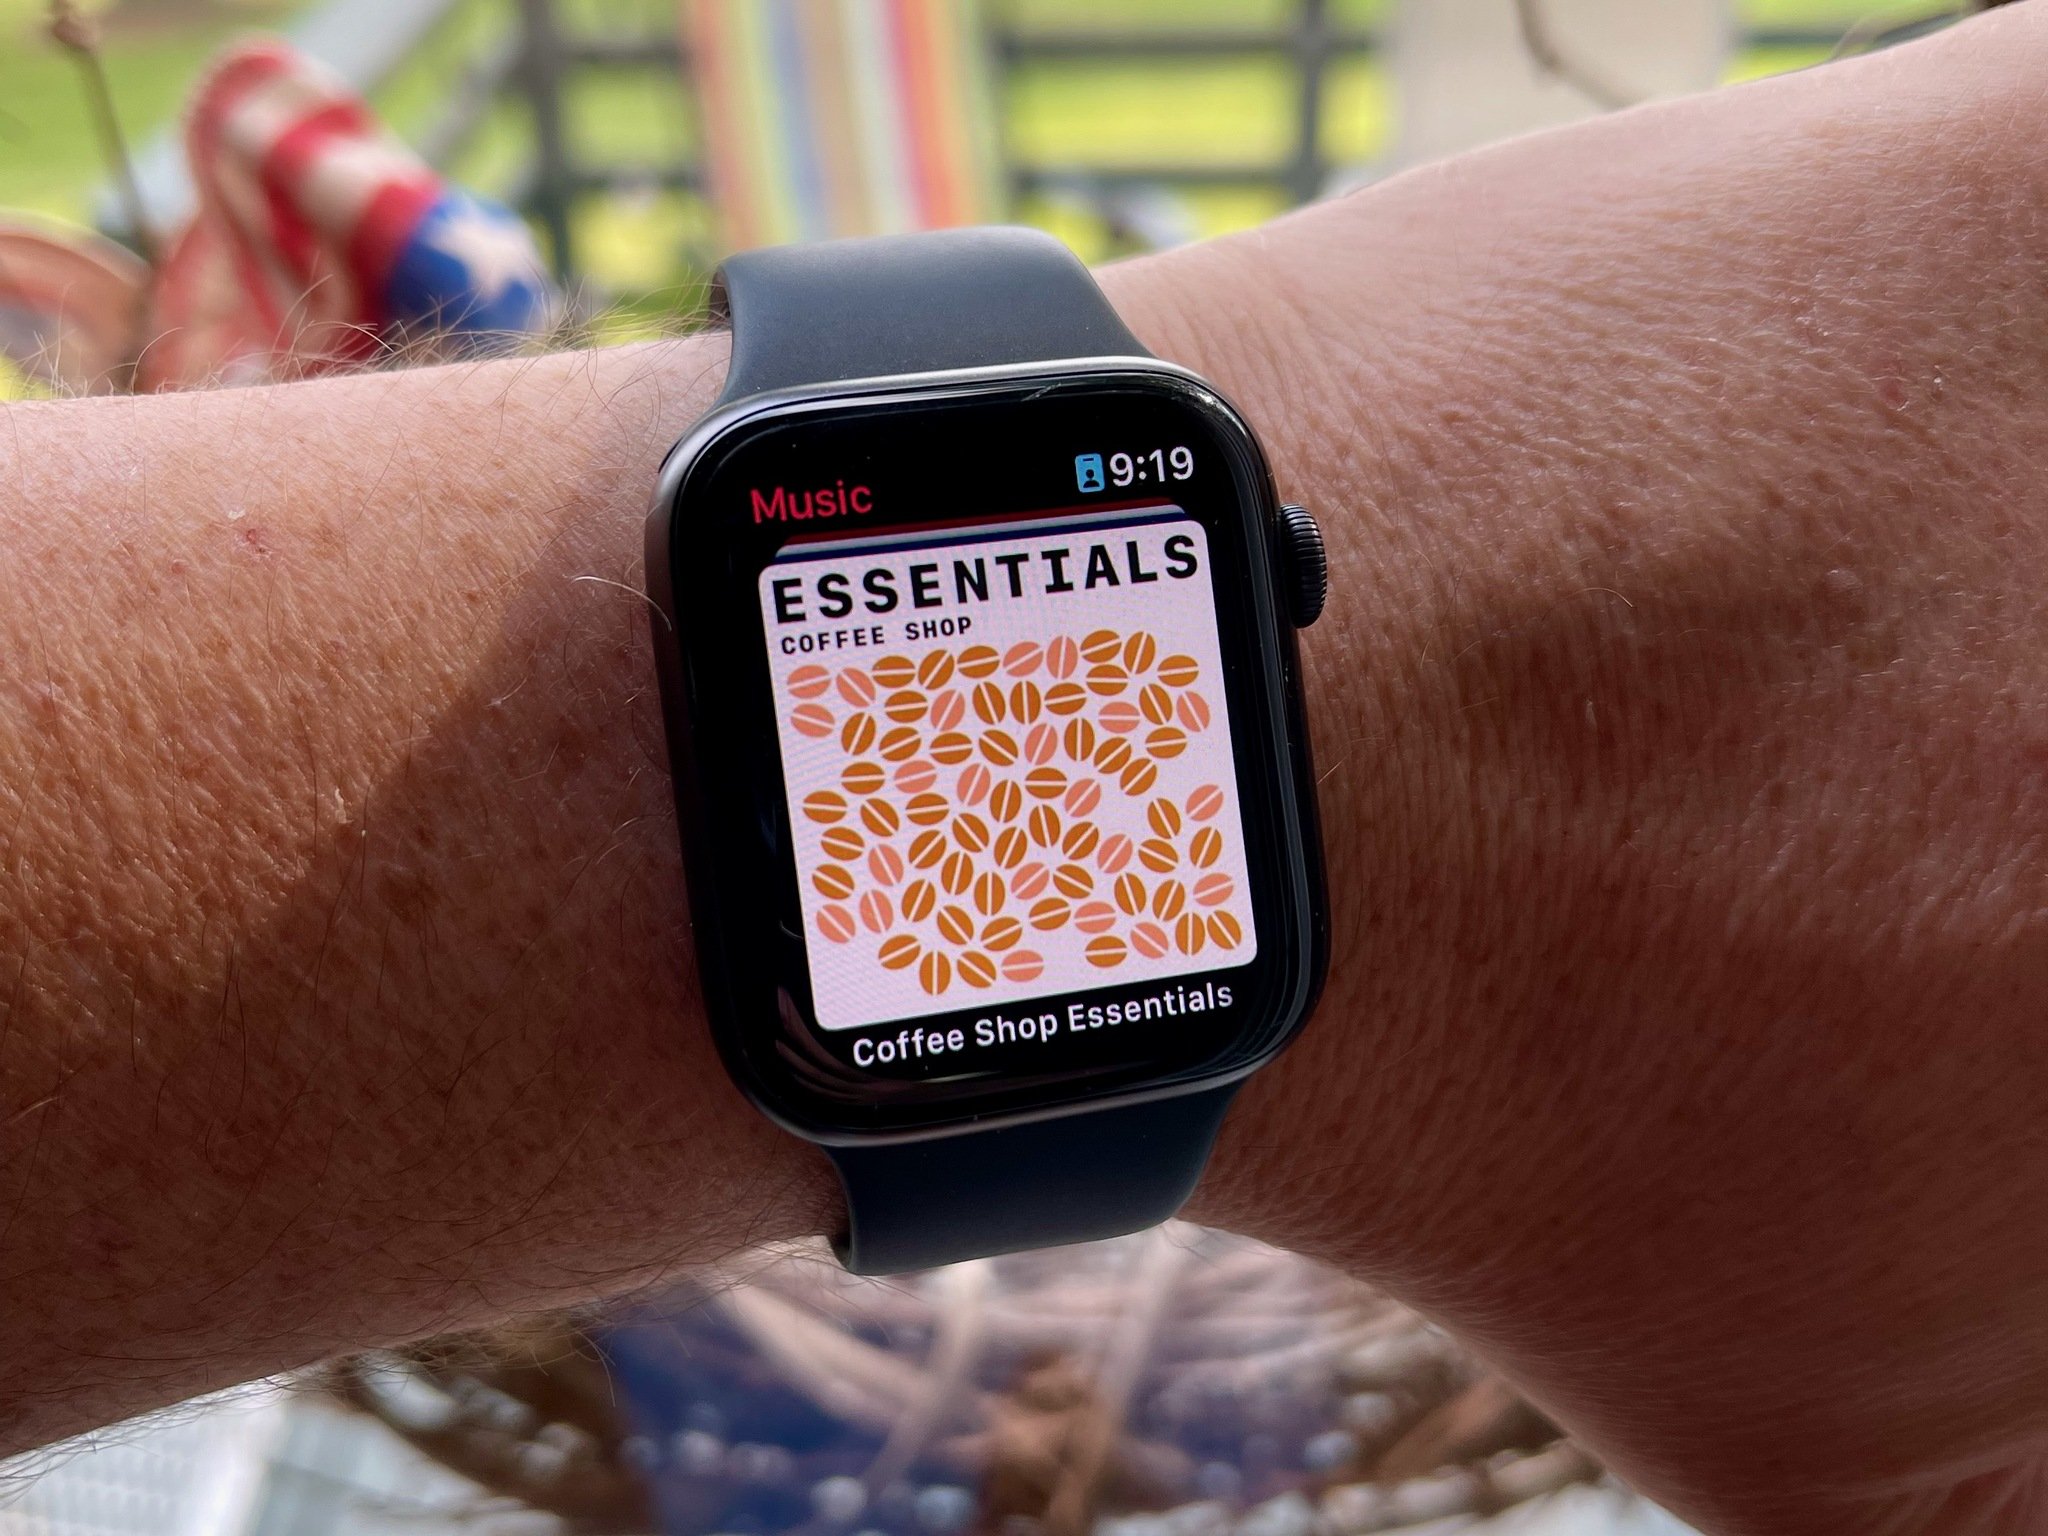 How to store music on an Apple Watch | TechRadar